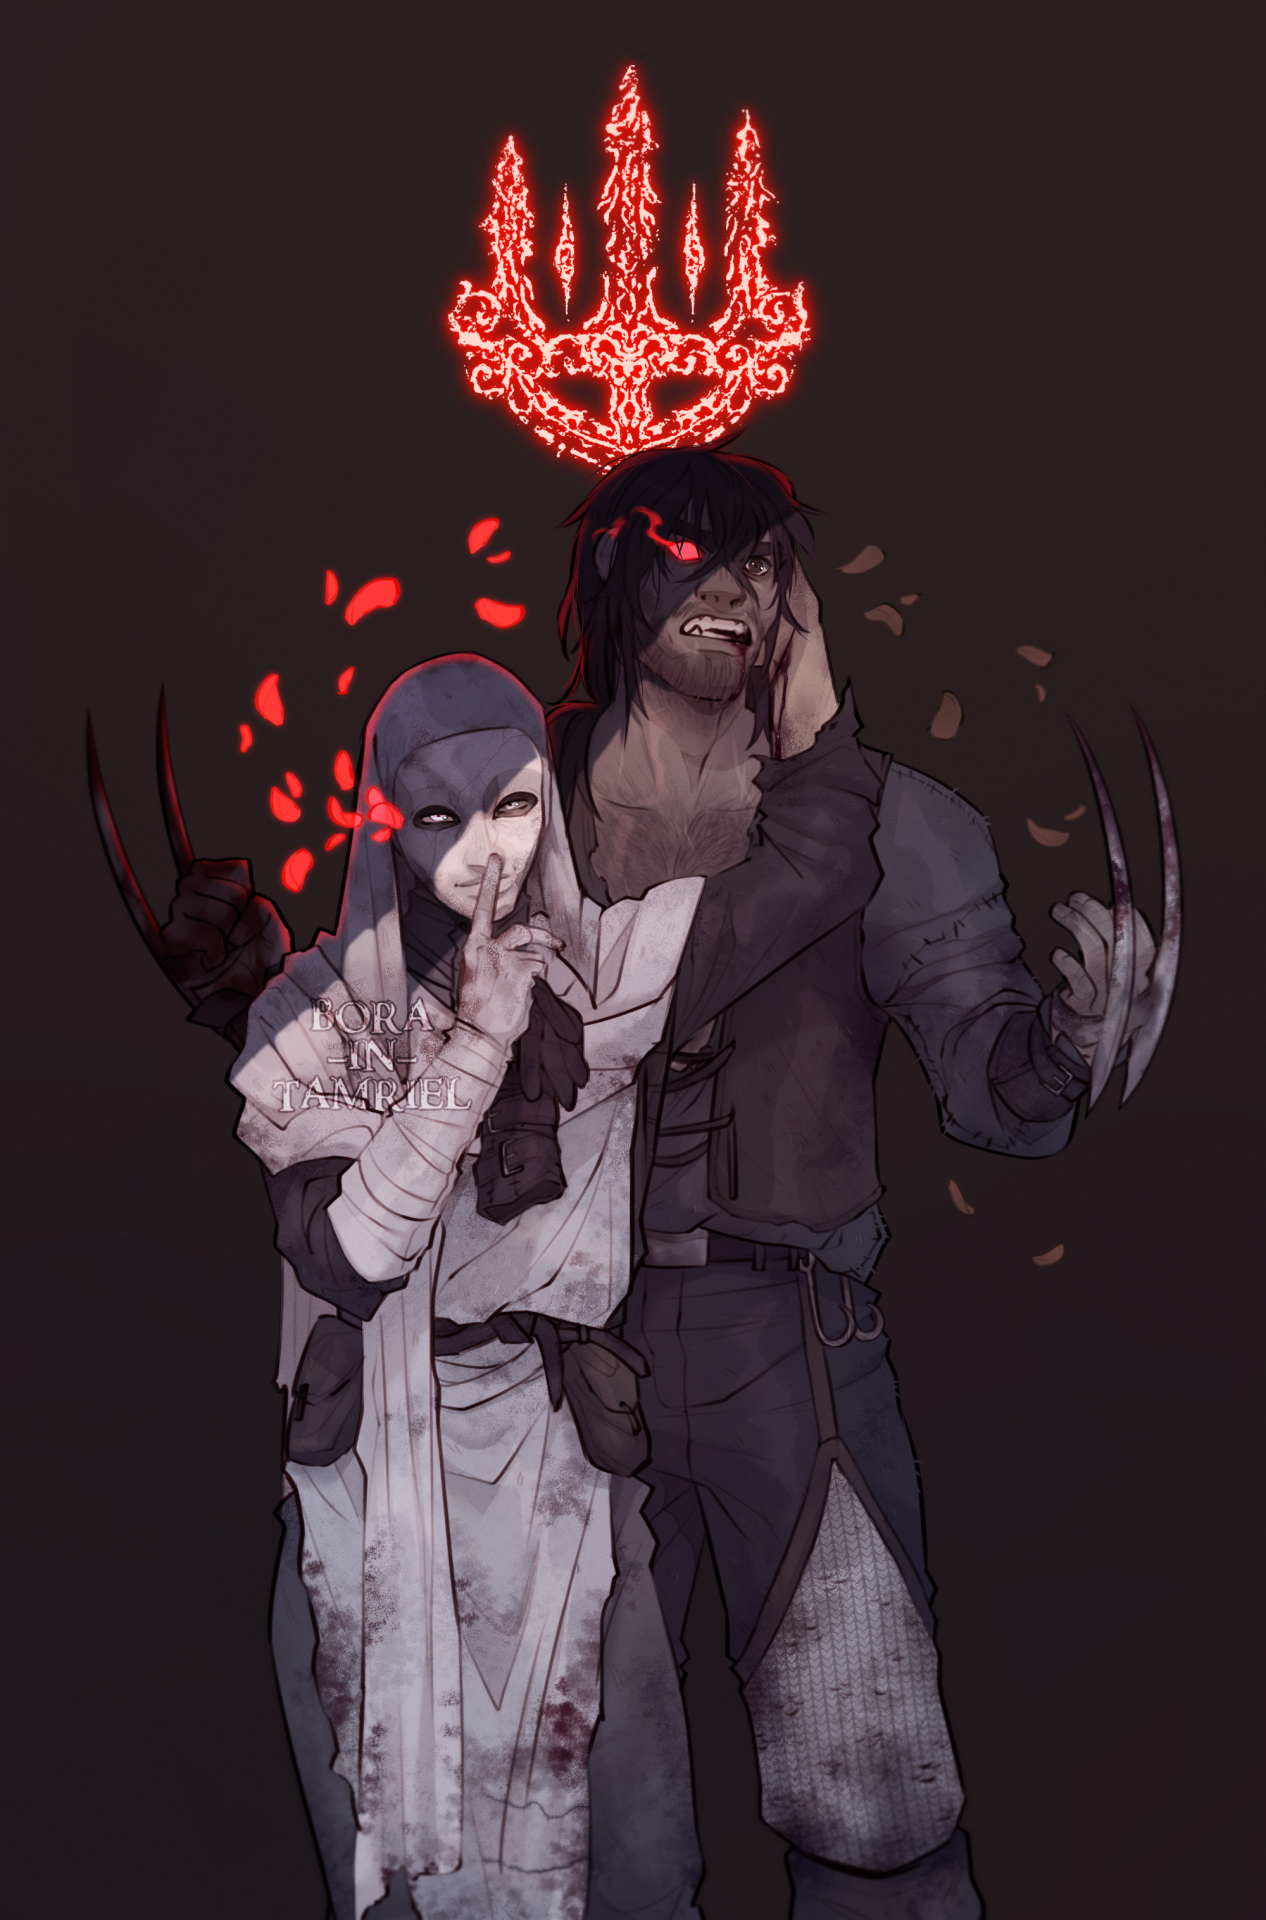 bora-in-tamriel:
“Your beauty never really scared me.
_________________
Varré and Coil (Elden Ring OC)
I really speedran this in a single day, I was so excited to have a cover idea for their story and now it’s done at 4am after over 12 hours of...